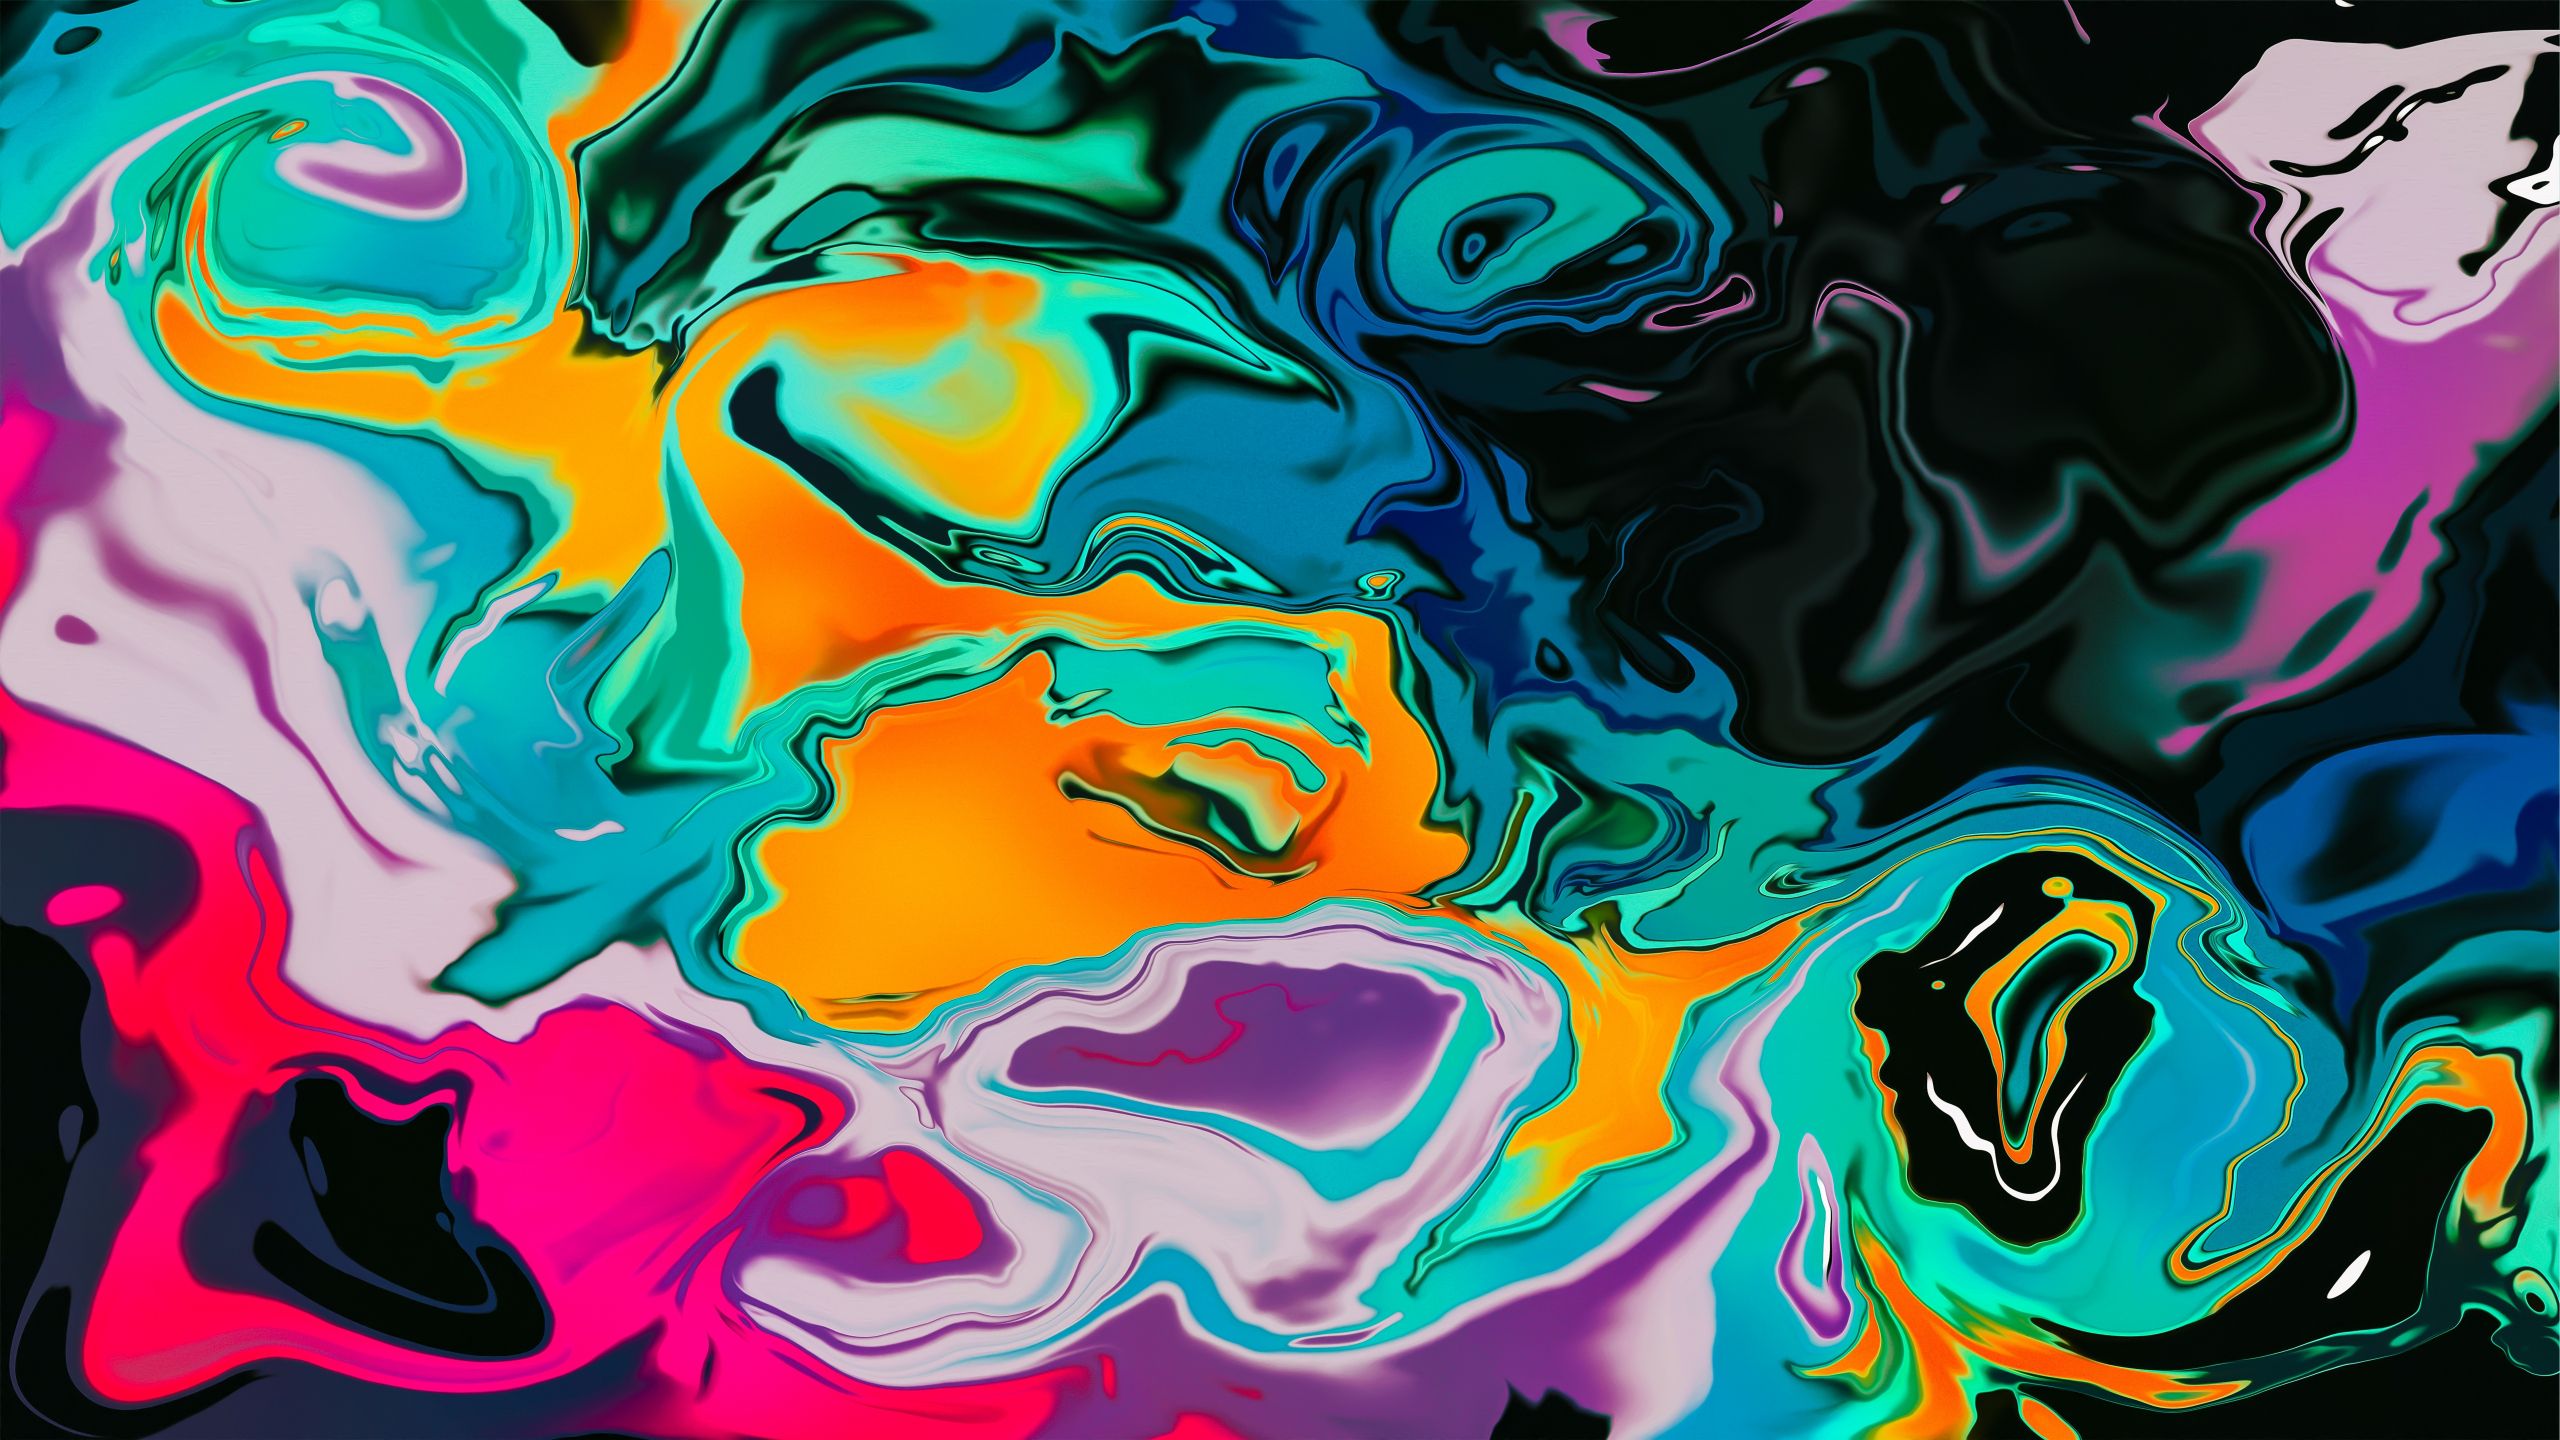 Download wallpaper 2560x1440 color paint, glitch abstract art, colorful, dual wide 16:9 2560x1440 HD background, 26774